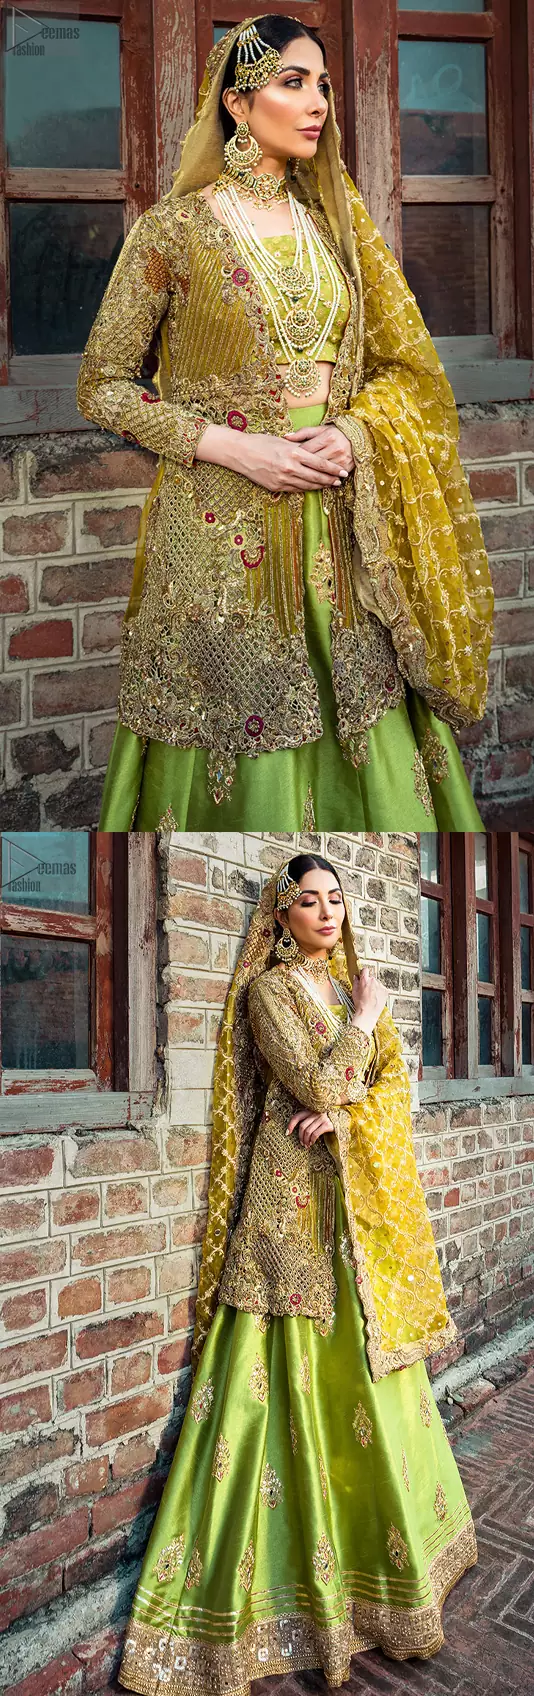 The attire displays dexterous gota work, golden embroidery, and mirror work, that brighten up its prevailing meritoriousness. Bright Green Lehenga Blouse – Front Open Shirt.